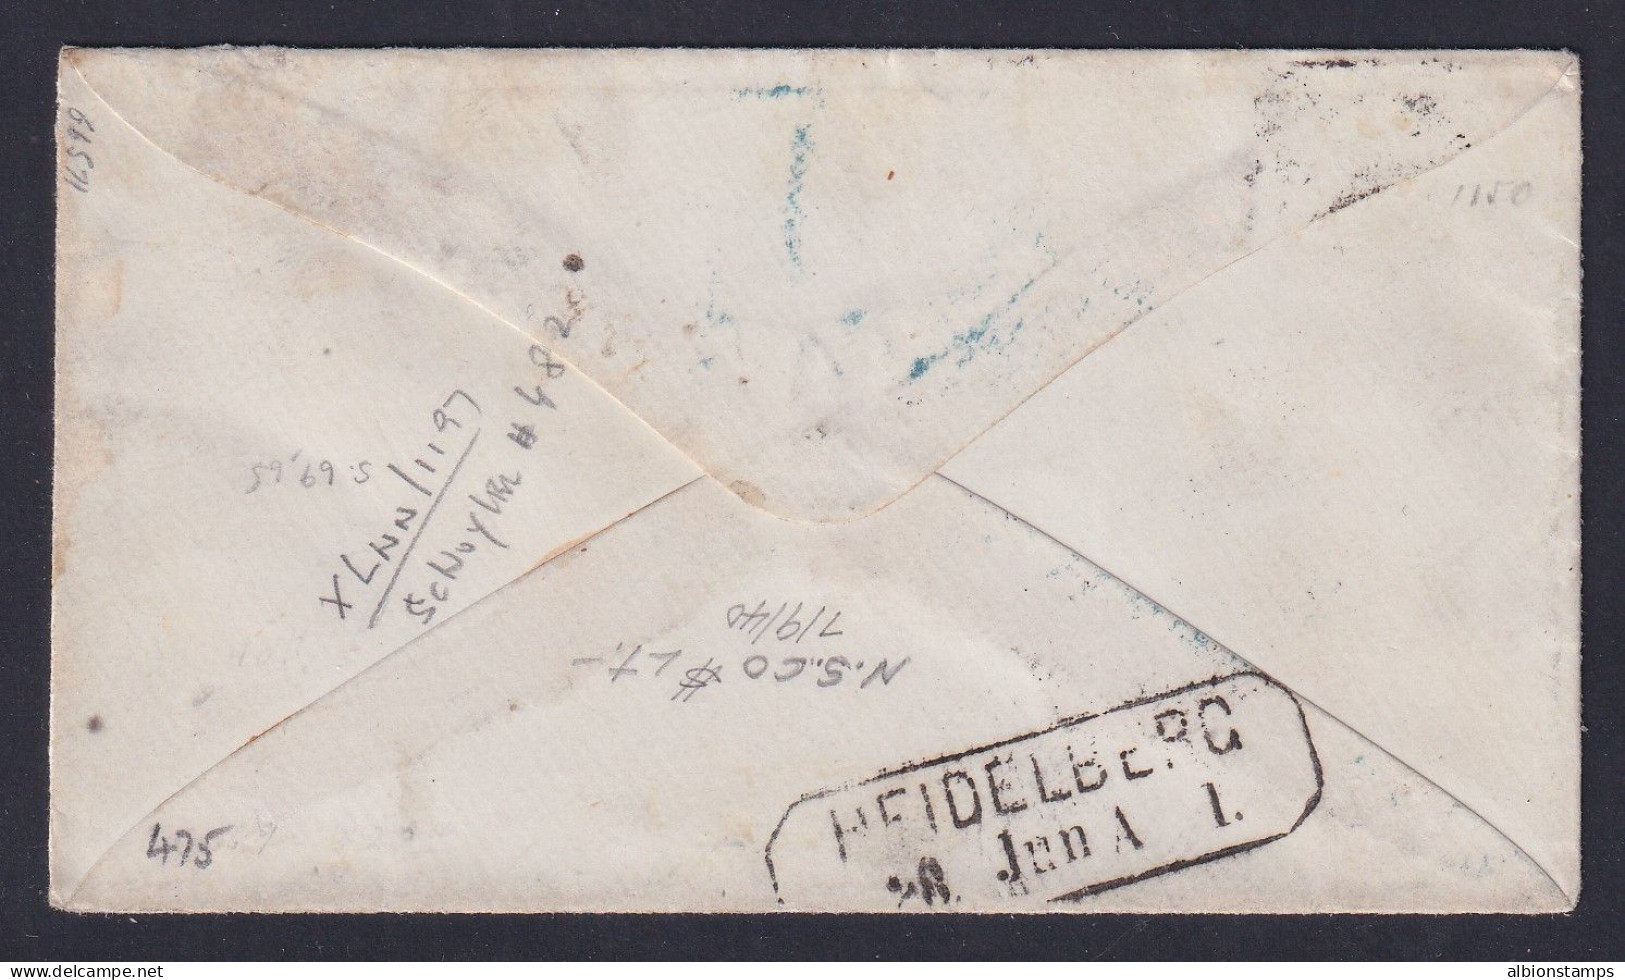 US, Scott 65, 69 With Quartered Cancels From Prattville Ala TO BADEN, GERMANY - Storia Postale